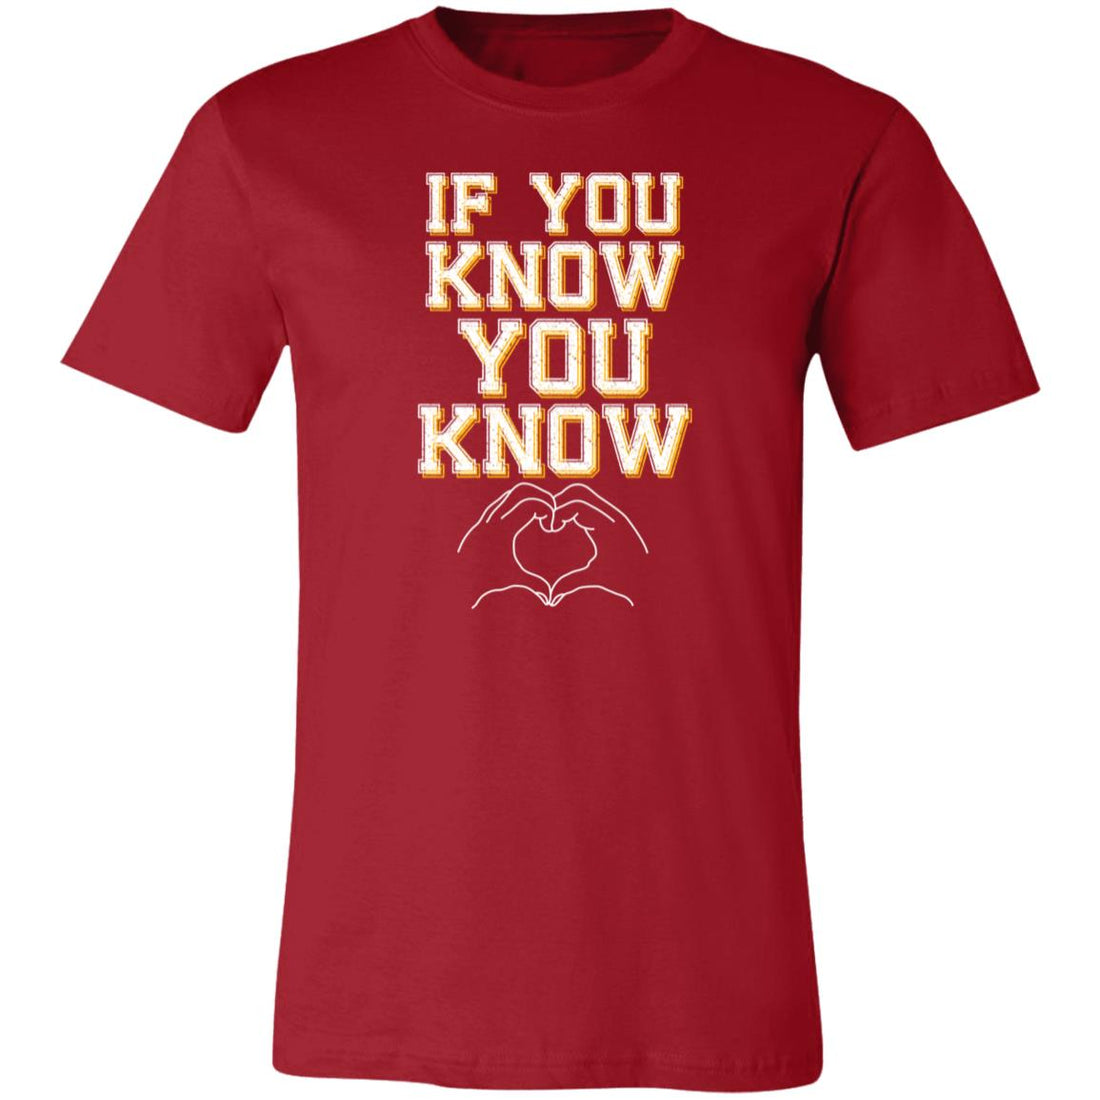 If you Know 87 T-Shirt - T-Shirts - Positively Sassy - If you Know 87 T-Shirt